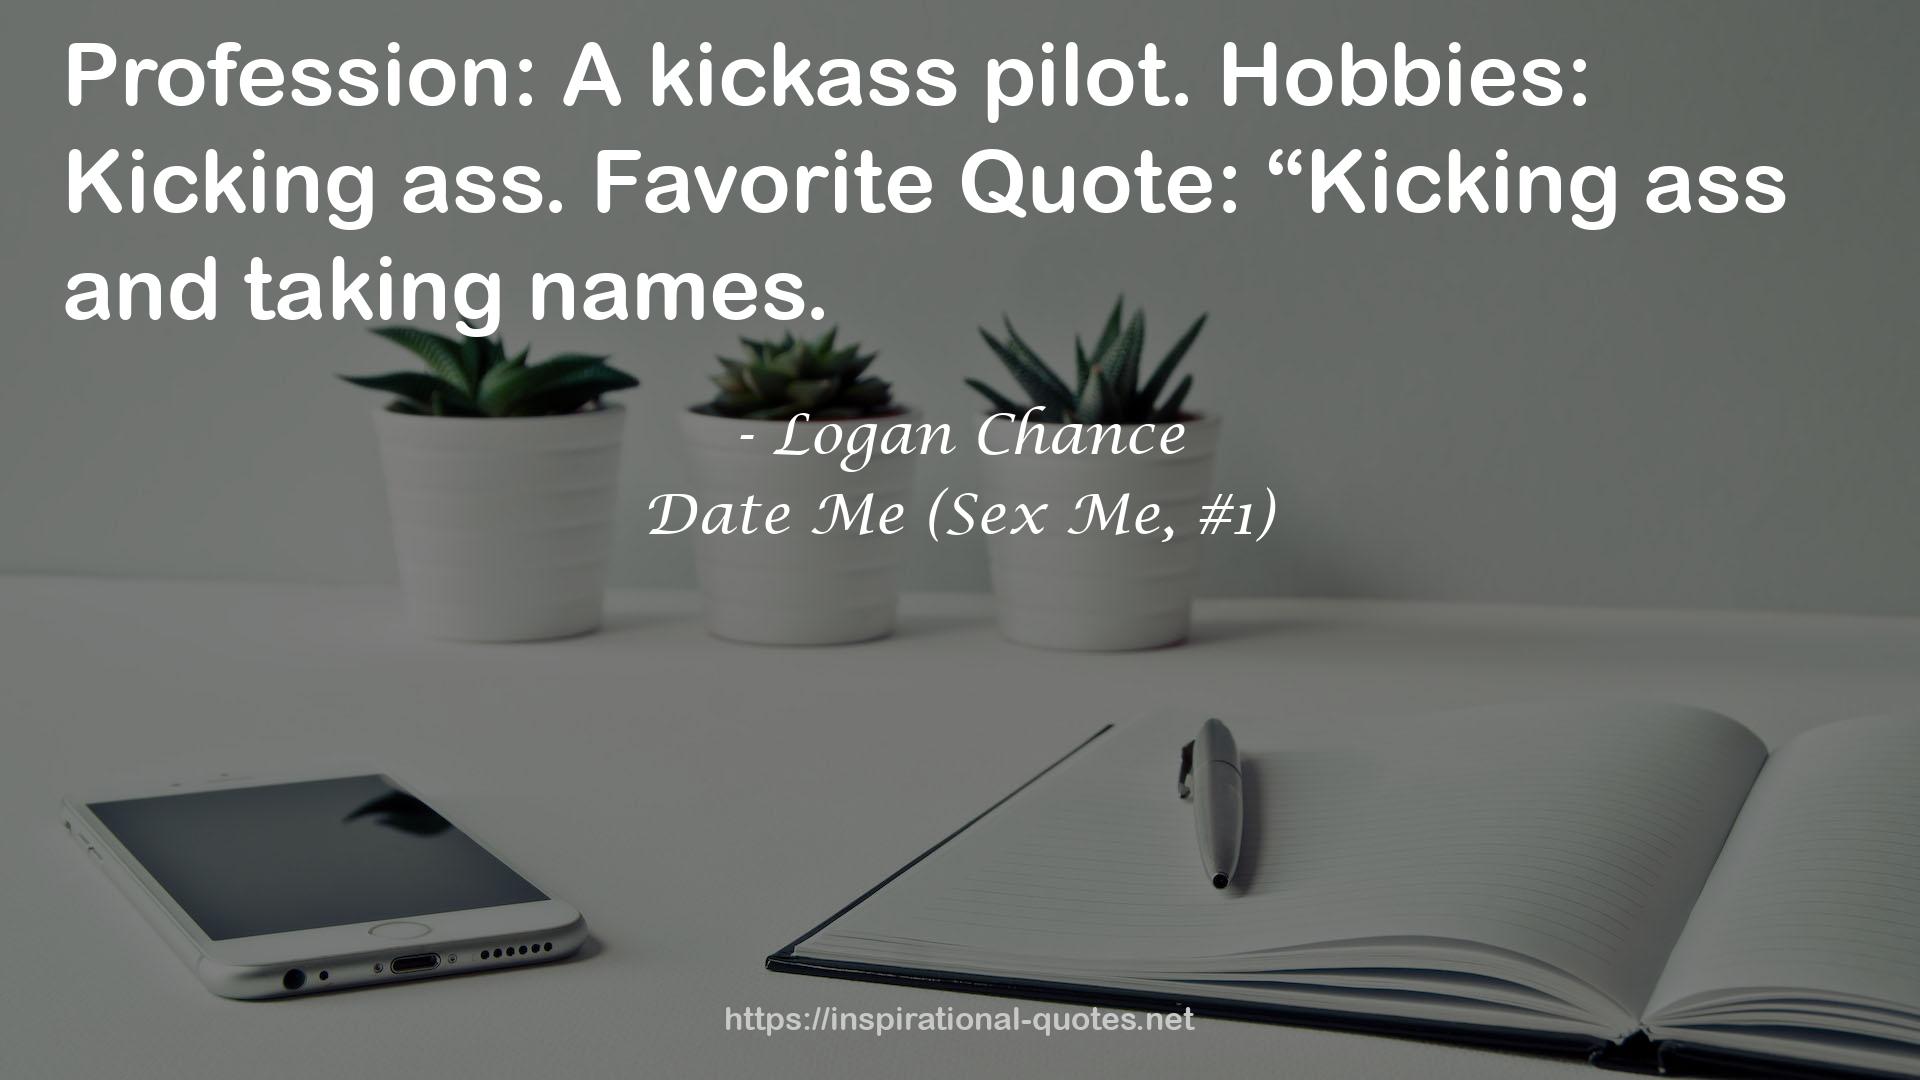 Date Me (Sex Me, #1) QUOTES